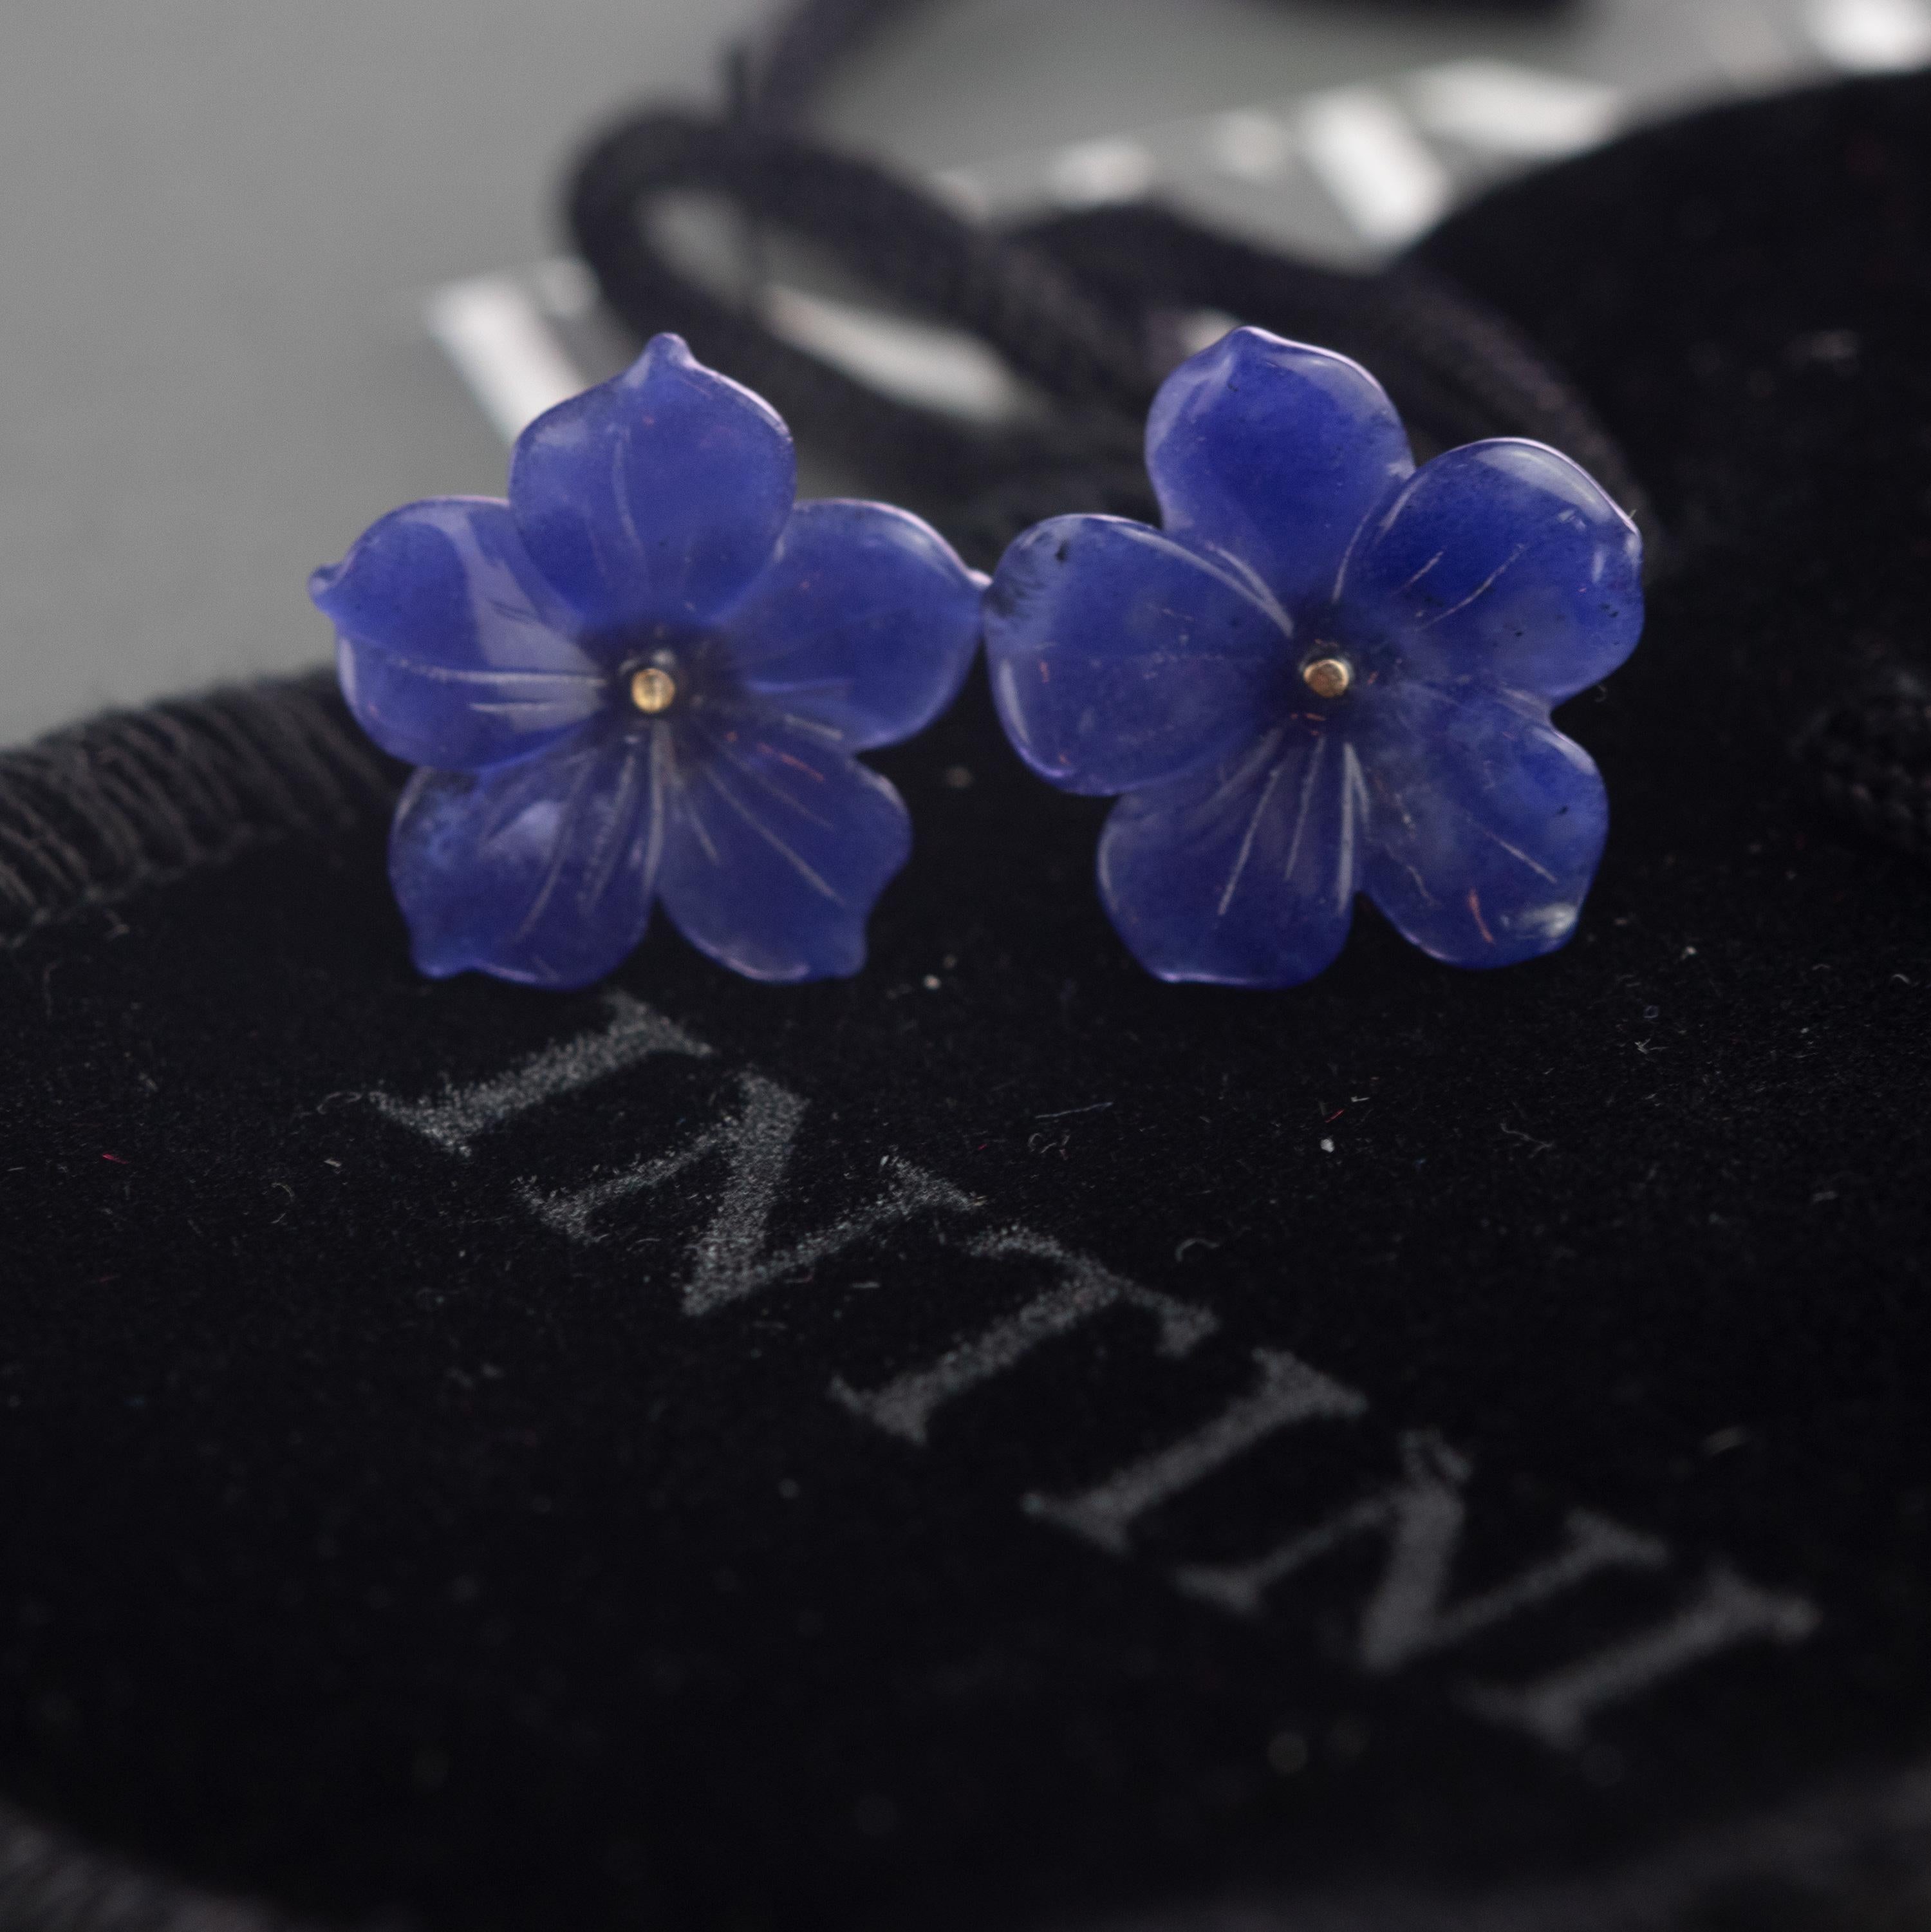 Astonishing natural Lapis Lazuli blue flowers stud handmade earrings, Carved petals that evoke the italian handmade traditional jewelry work.

Beautiful and delicate design that evokes the roots of beauty that are gradually woven to achieve a